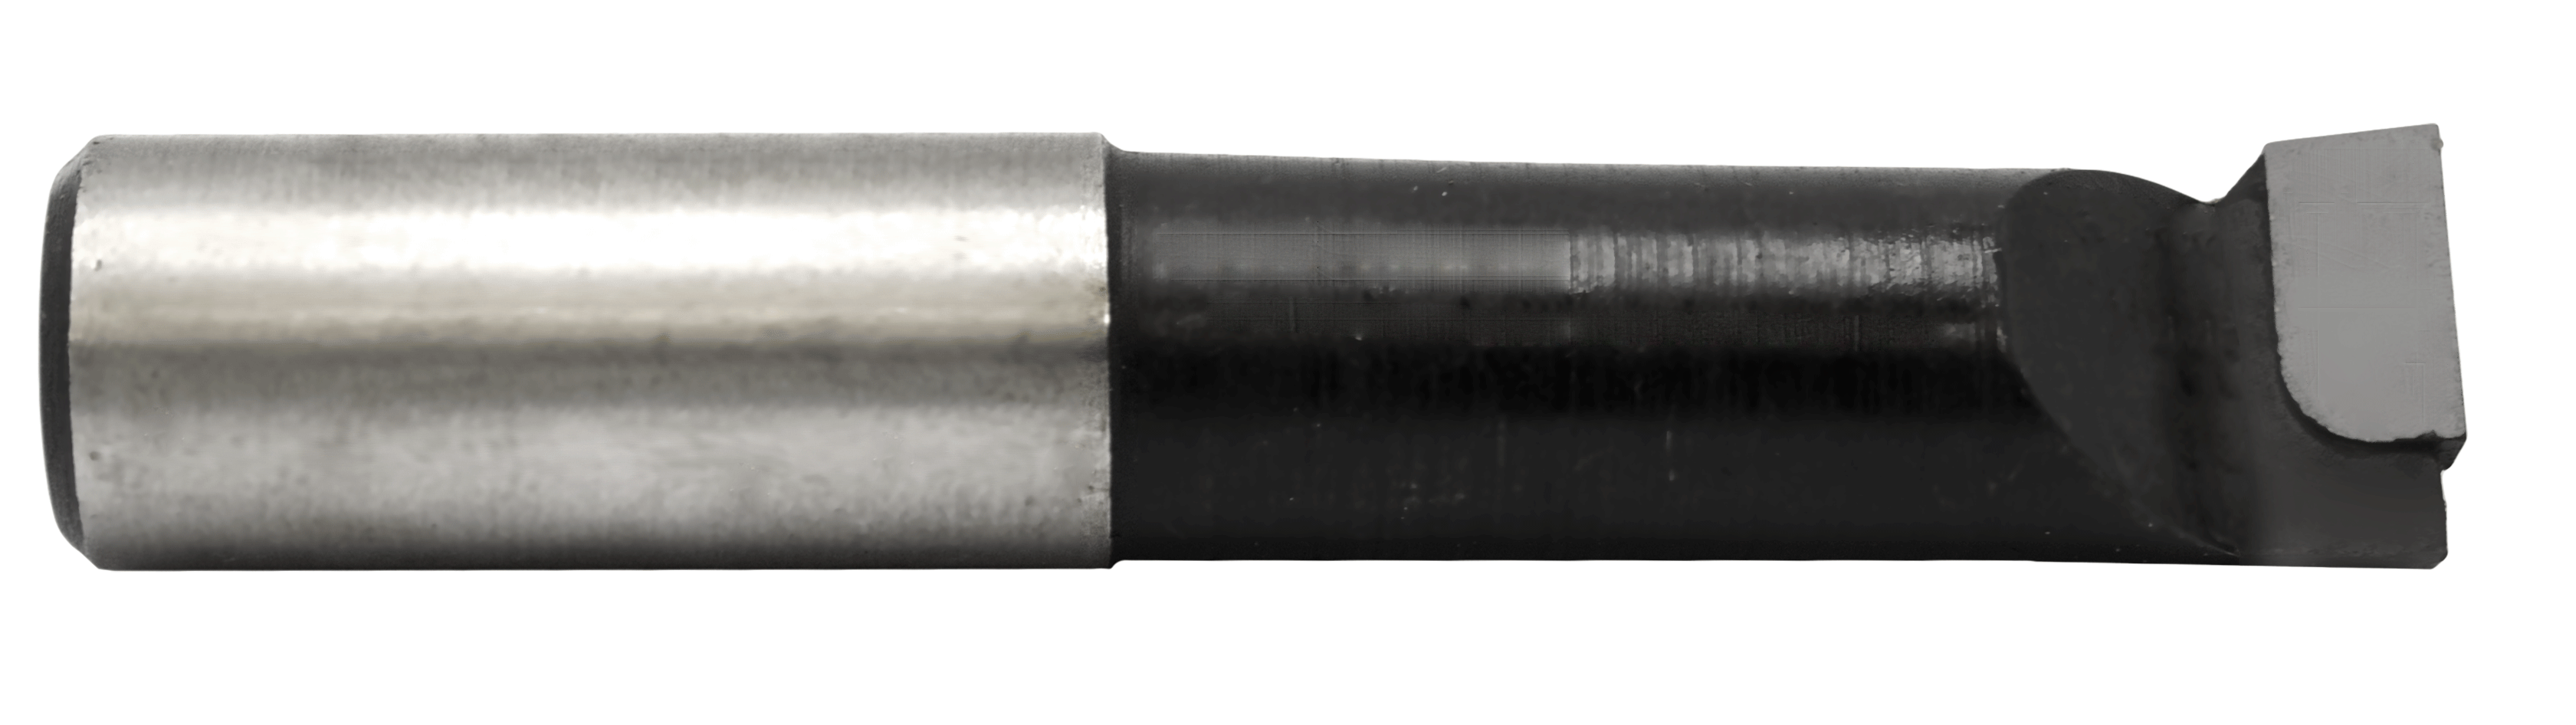 Super-Bore 3/8" C-6 for Steel Applications